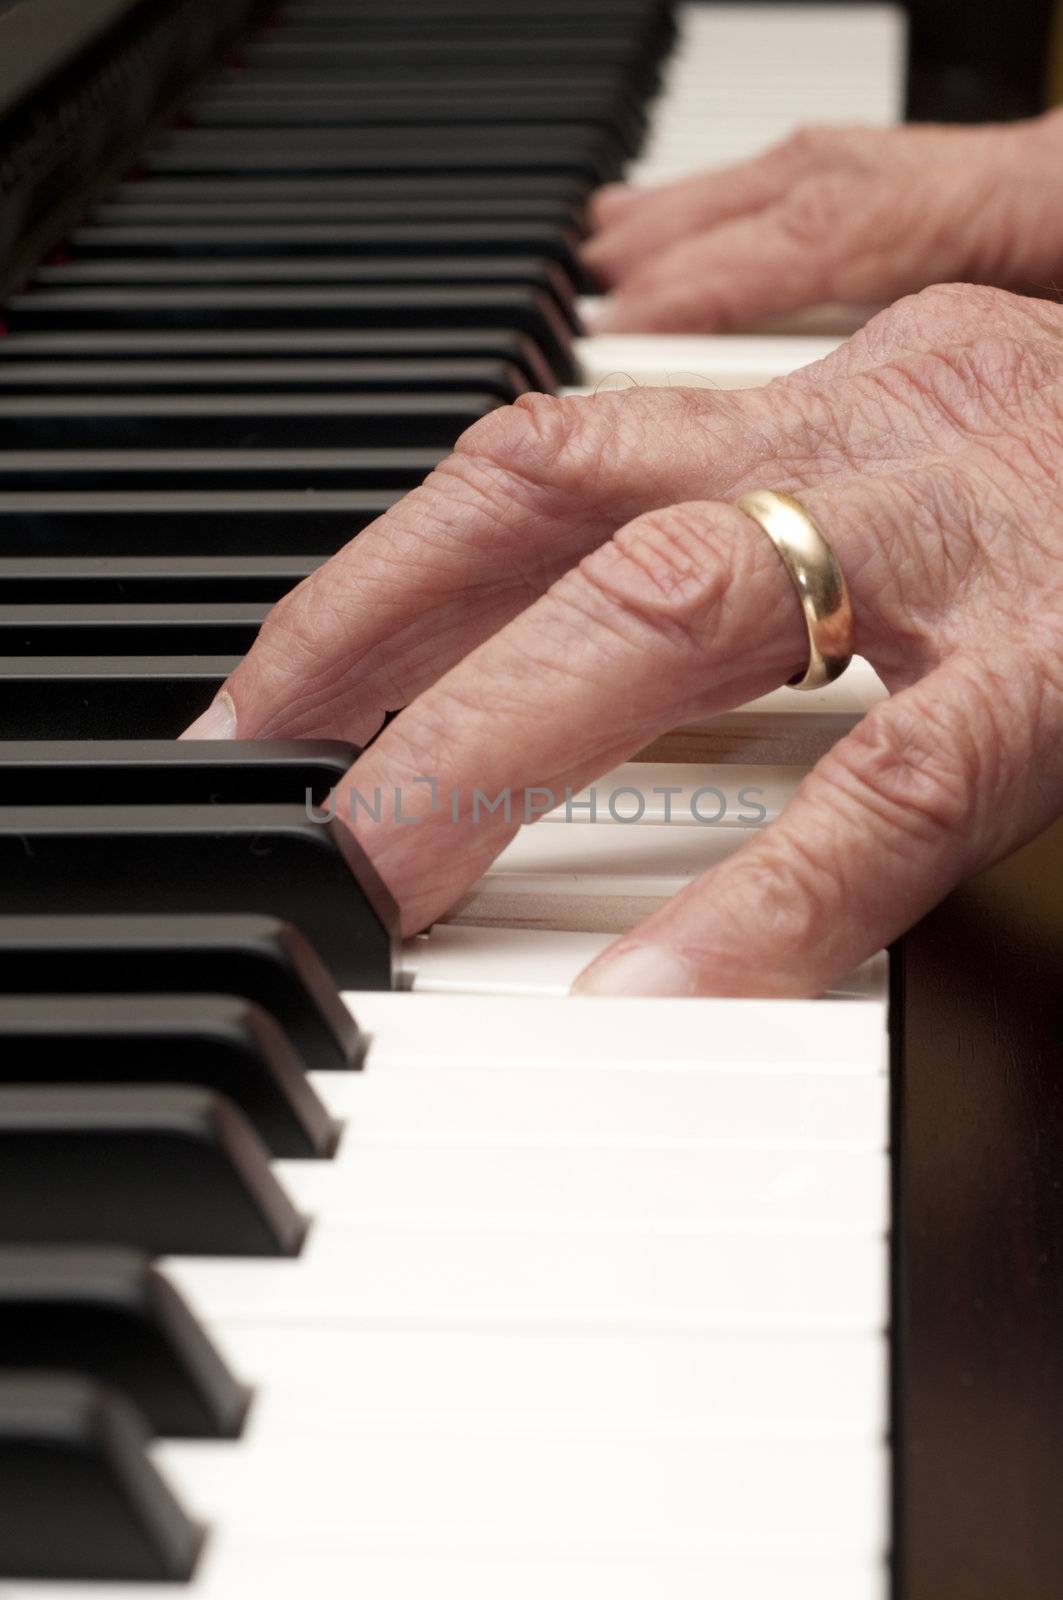 Selective focus on the foreground hand of an older man playing the piano